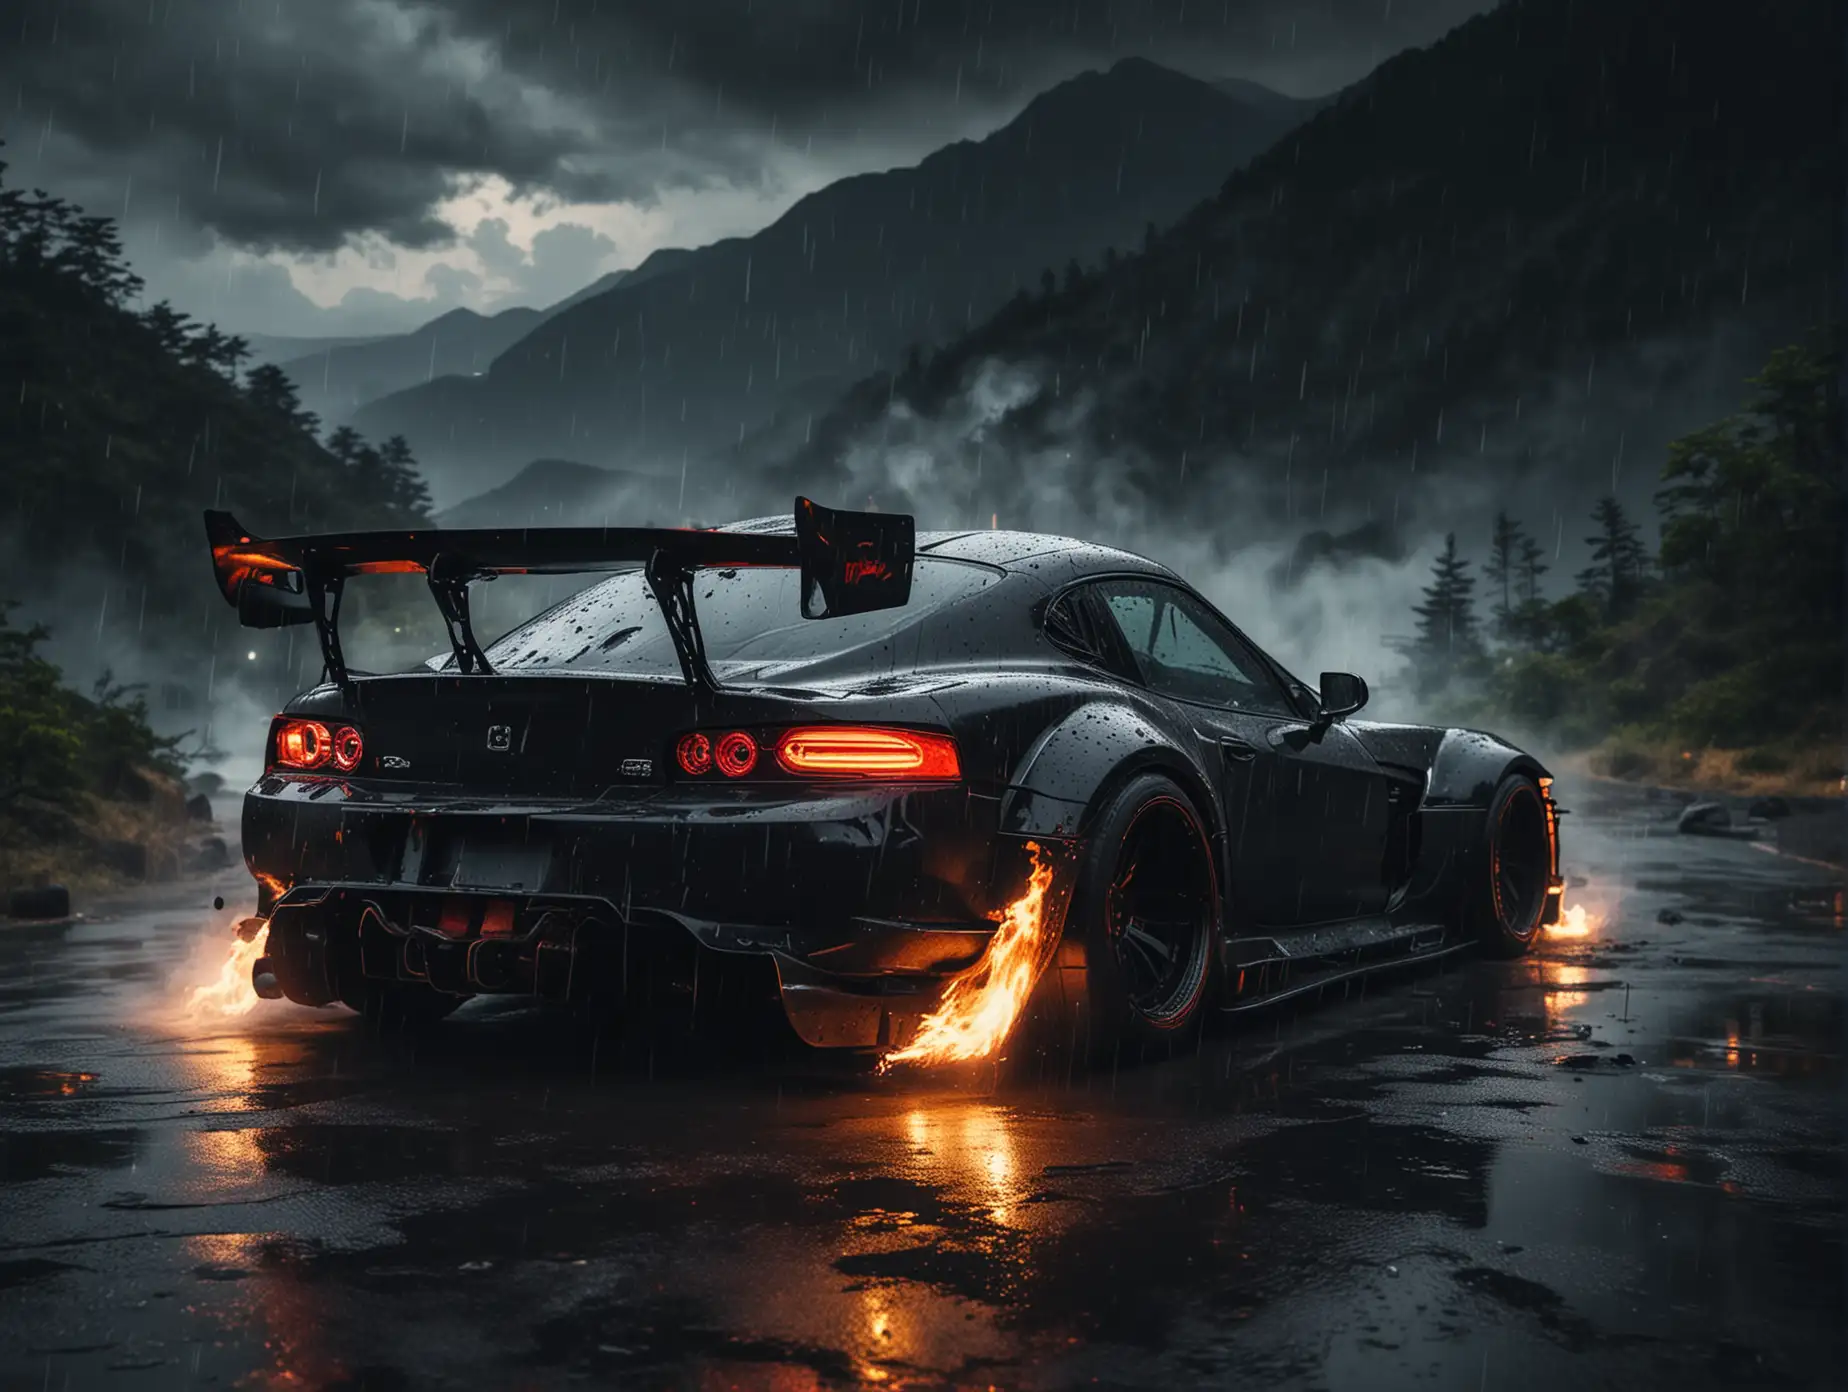 Create  futuristic  Japanese cars  tuning type  Evil venom with big Wells  drifting at night in the mountains background black dark color rear view from far away raining with fire